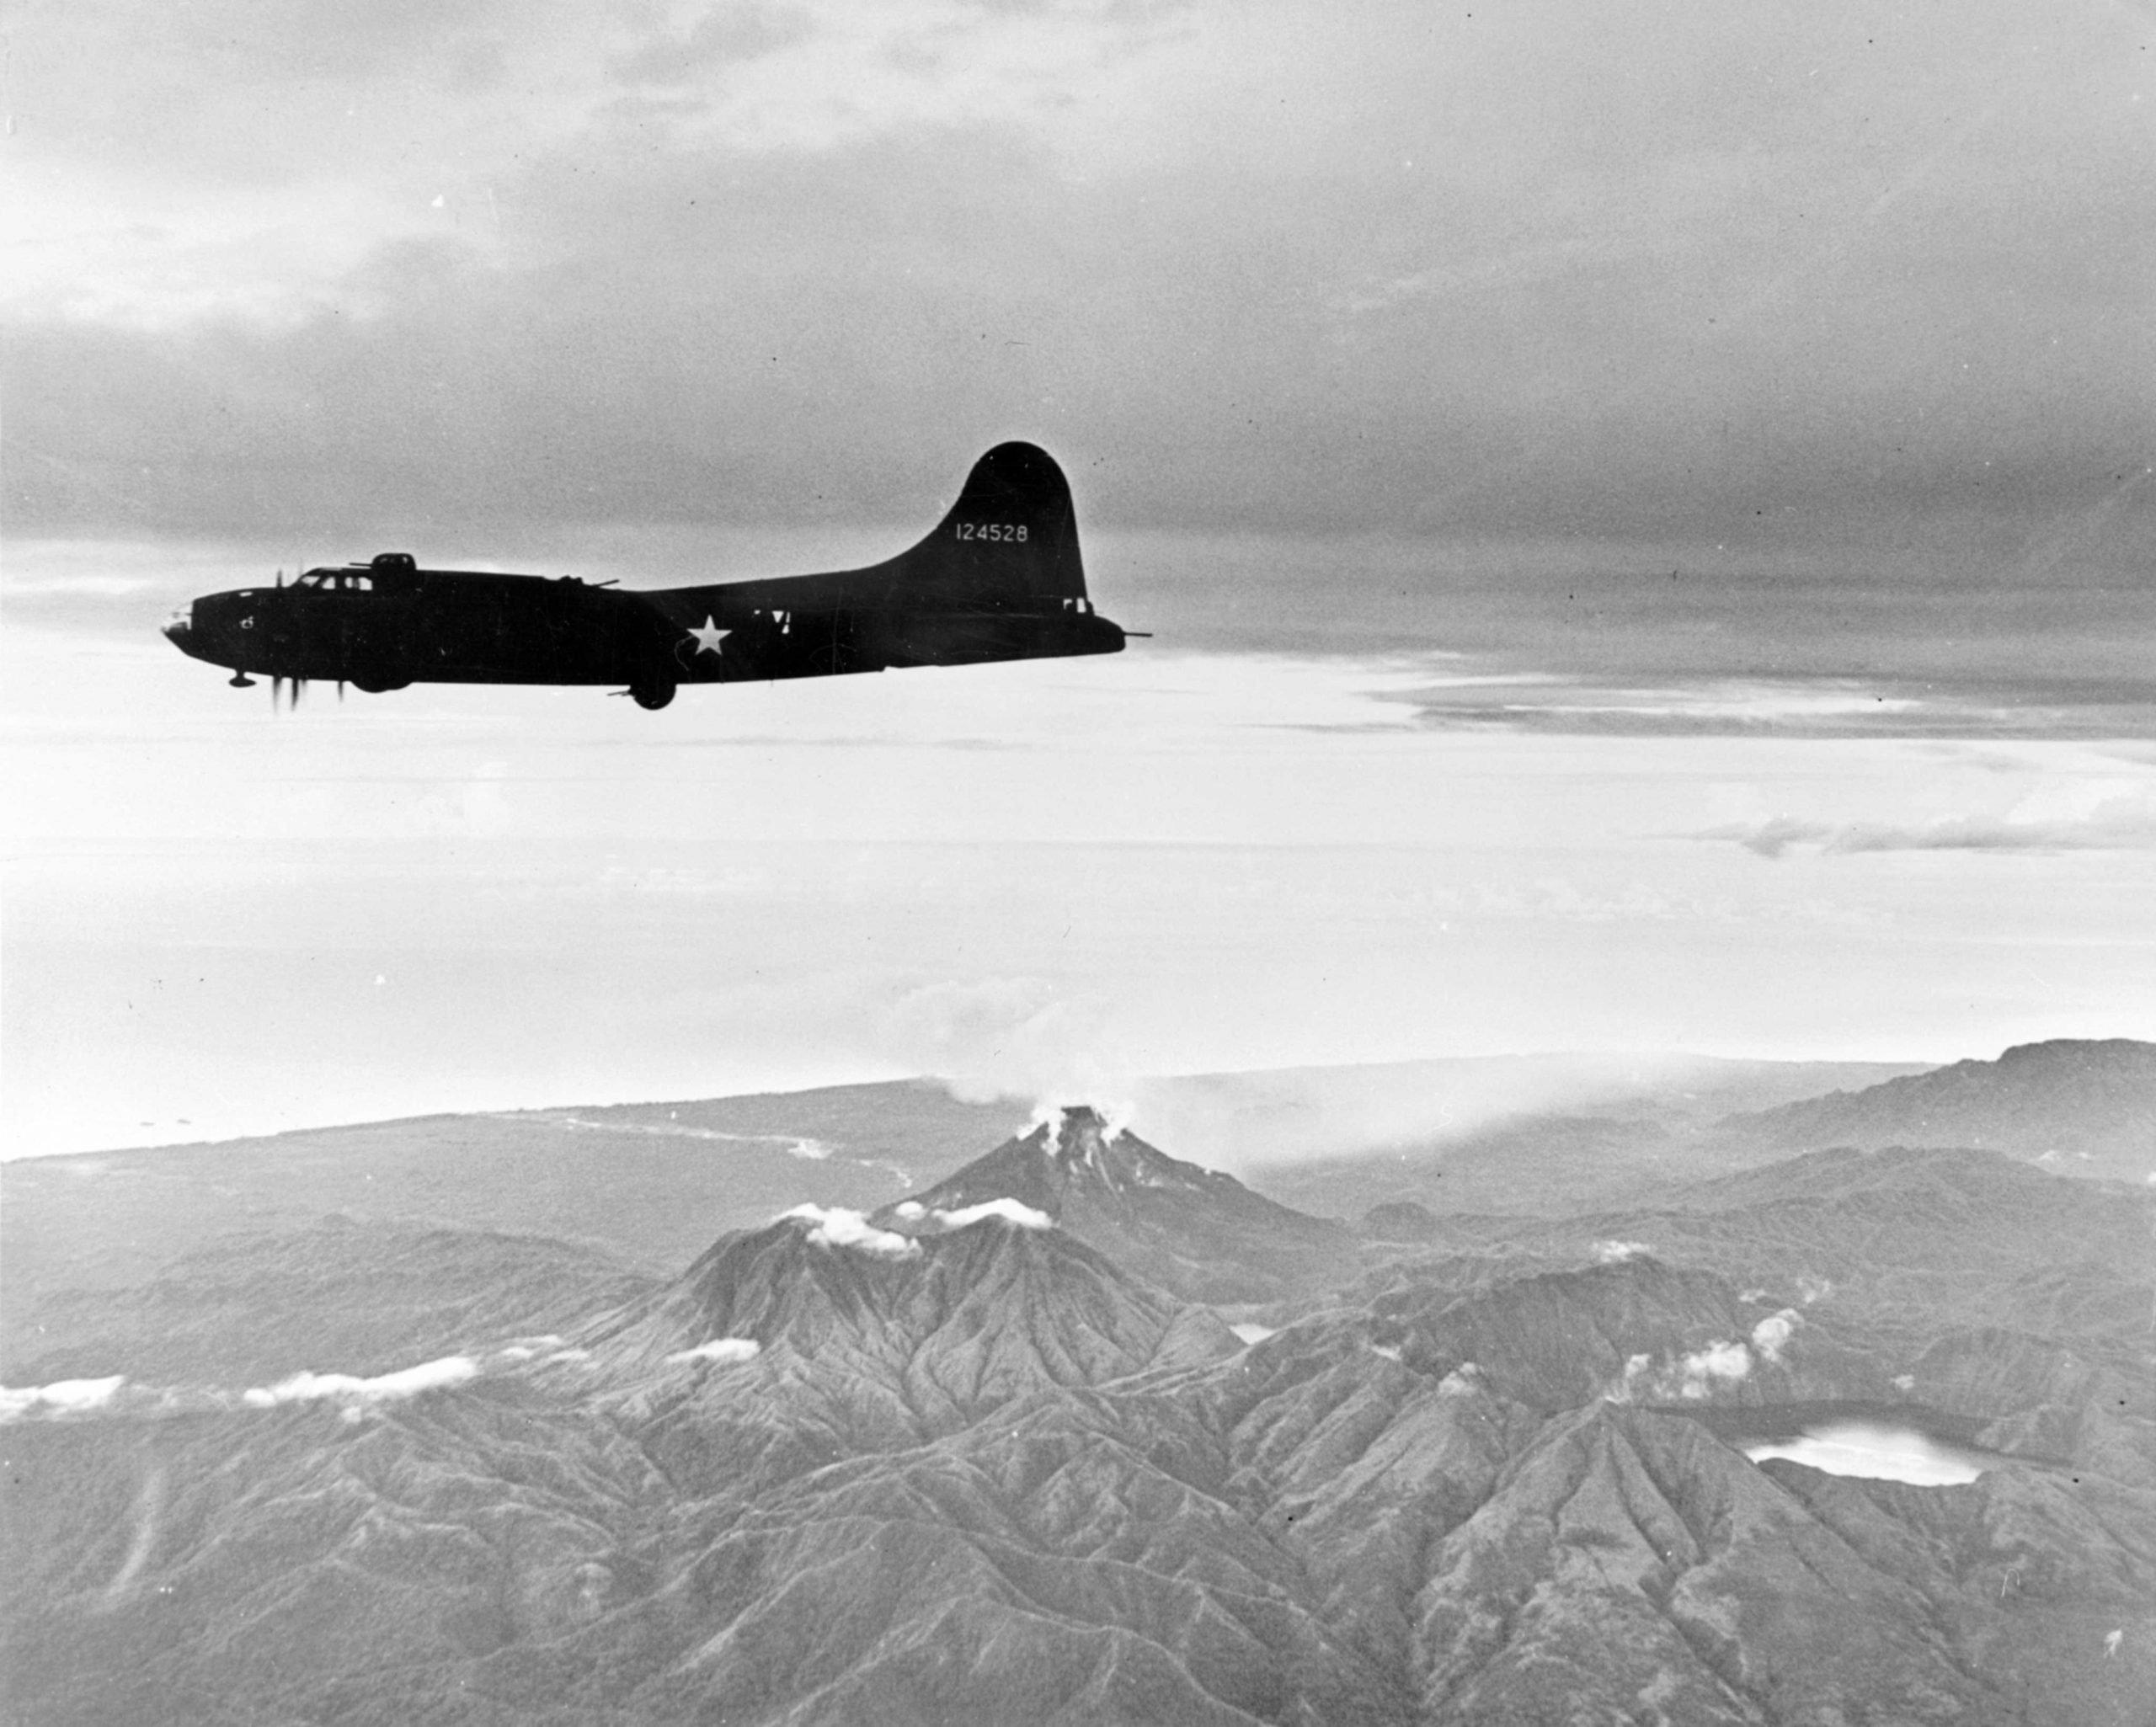 American Boeing B-17 Flying Fortress bomber